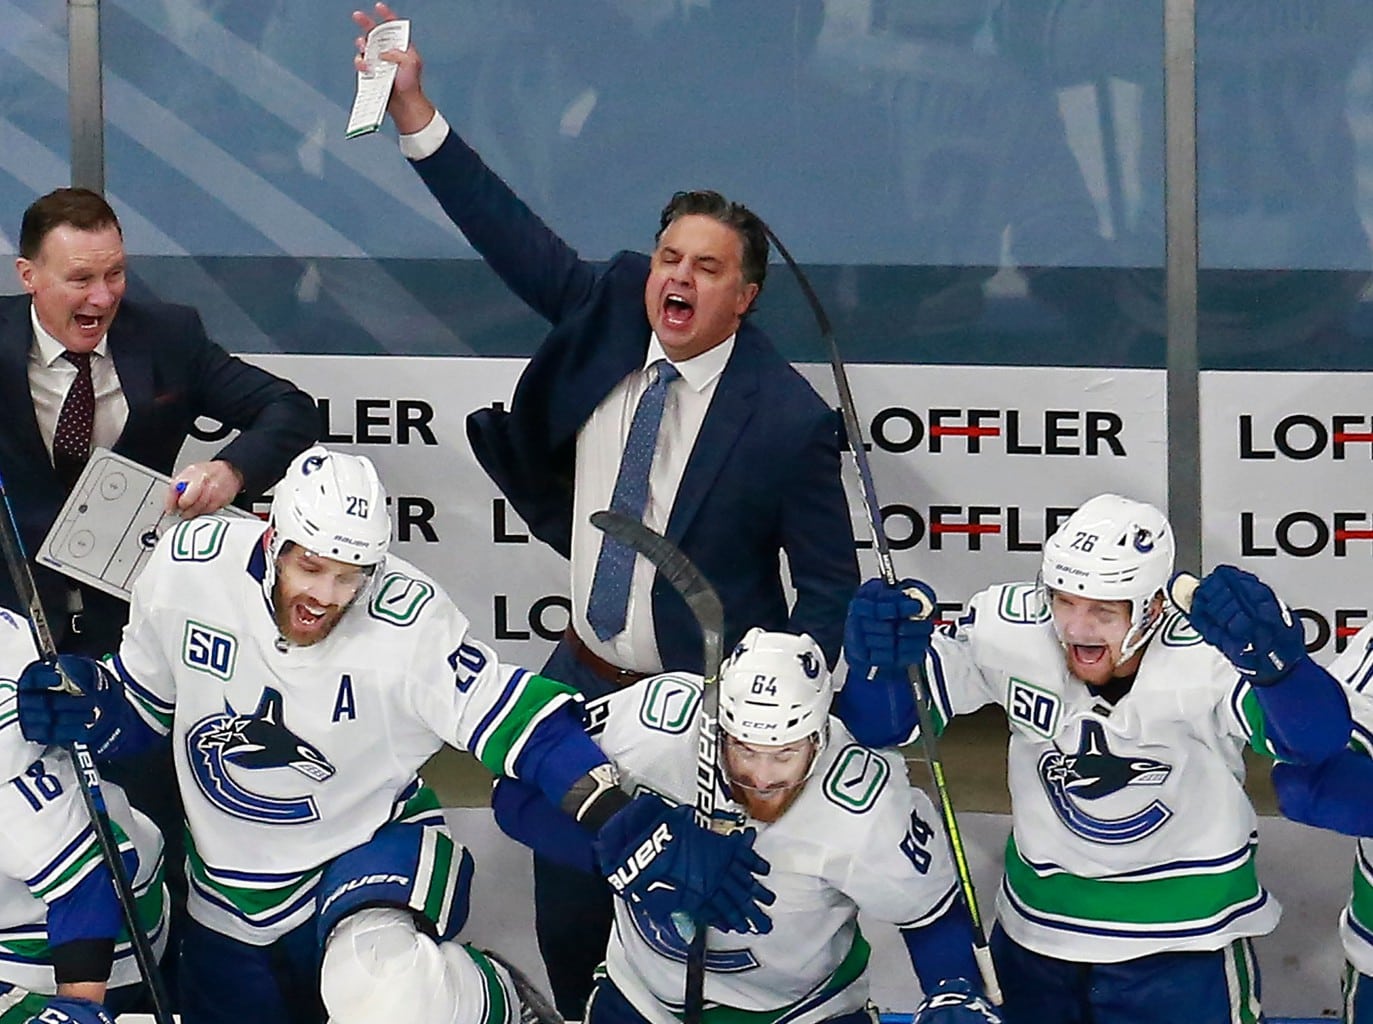 Could Canucks owners bring the WHL back to Chilliwack? - Vancouver